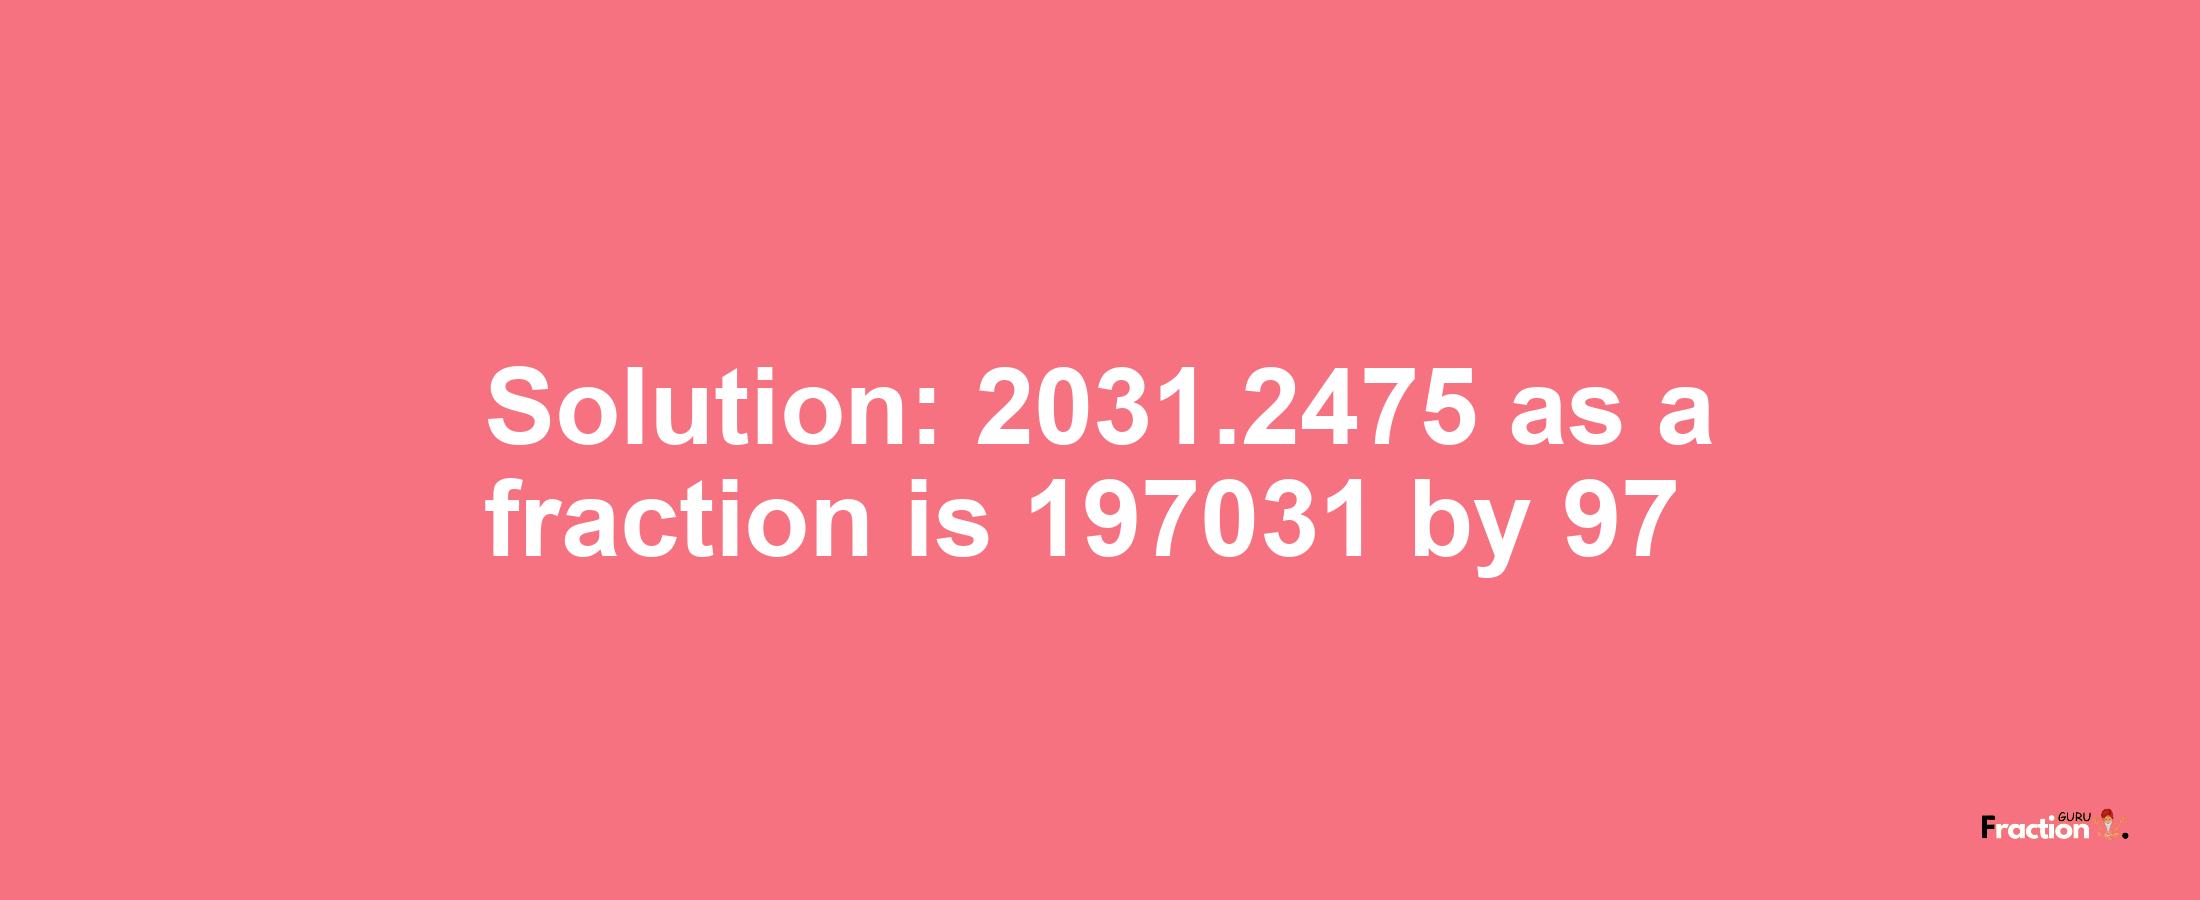 Solution:2031.2475 as a fraction is 197031/97